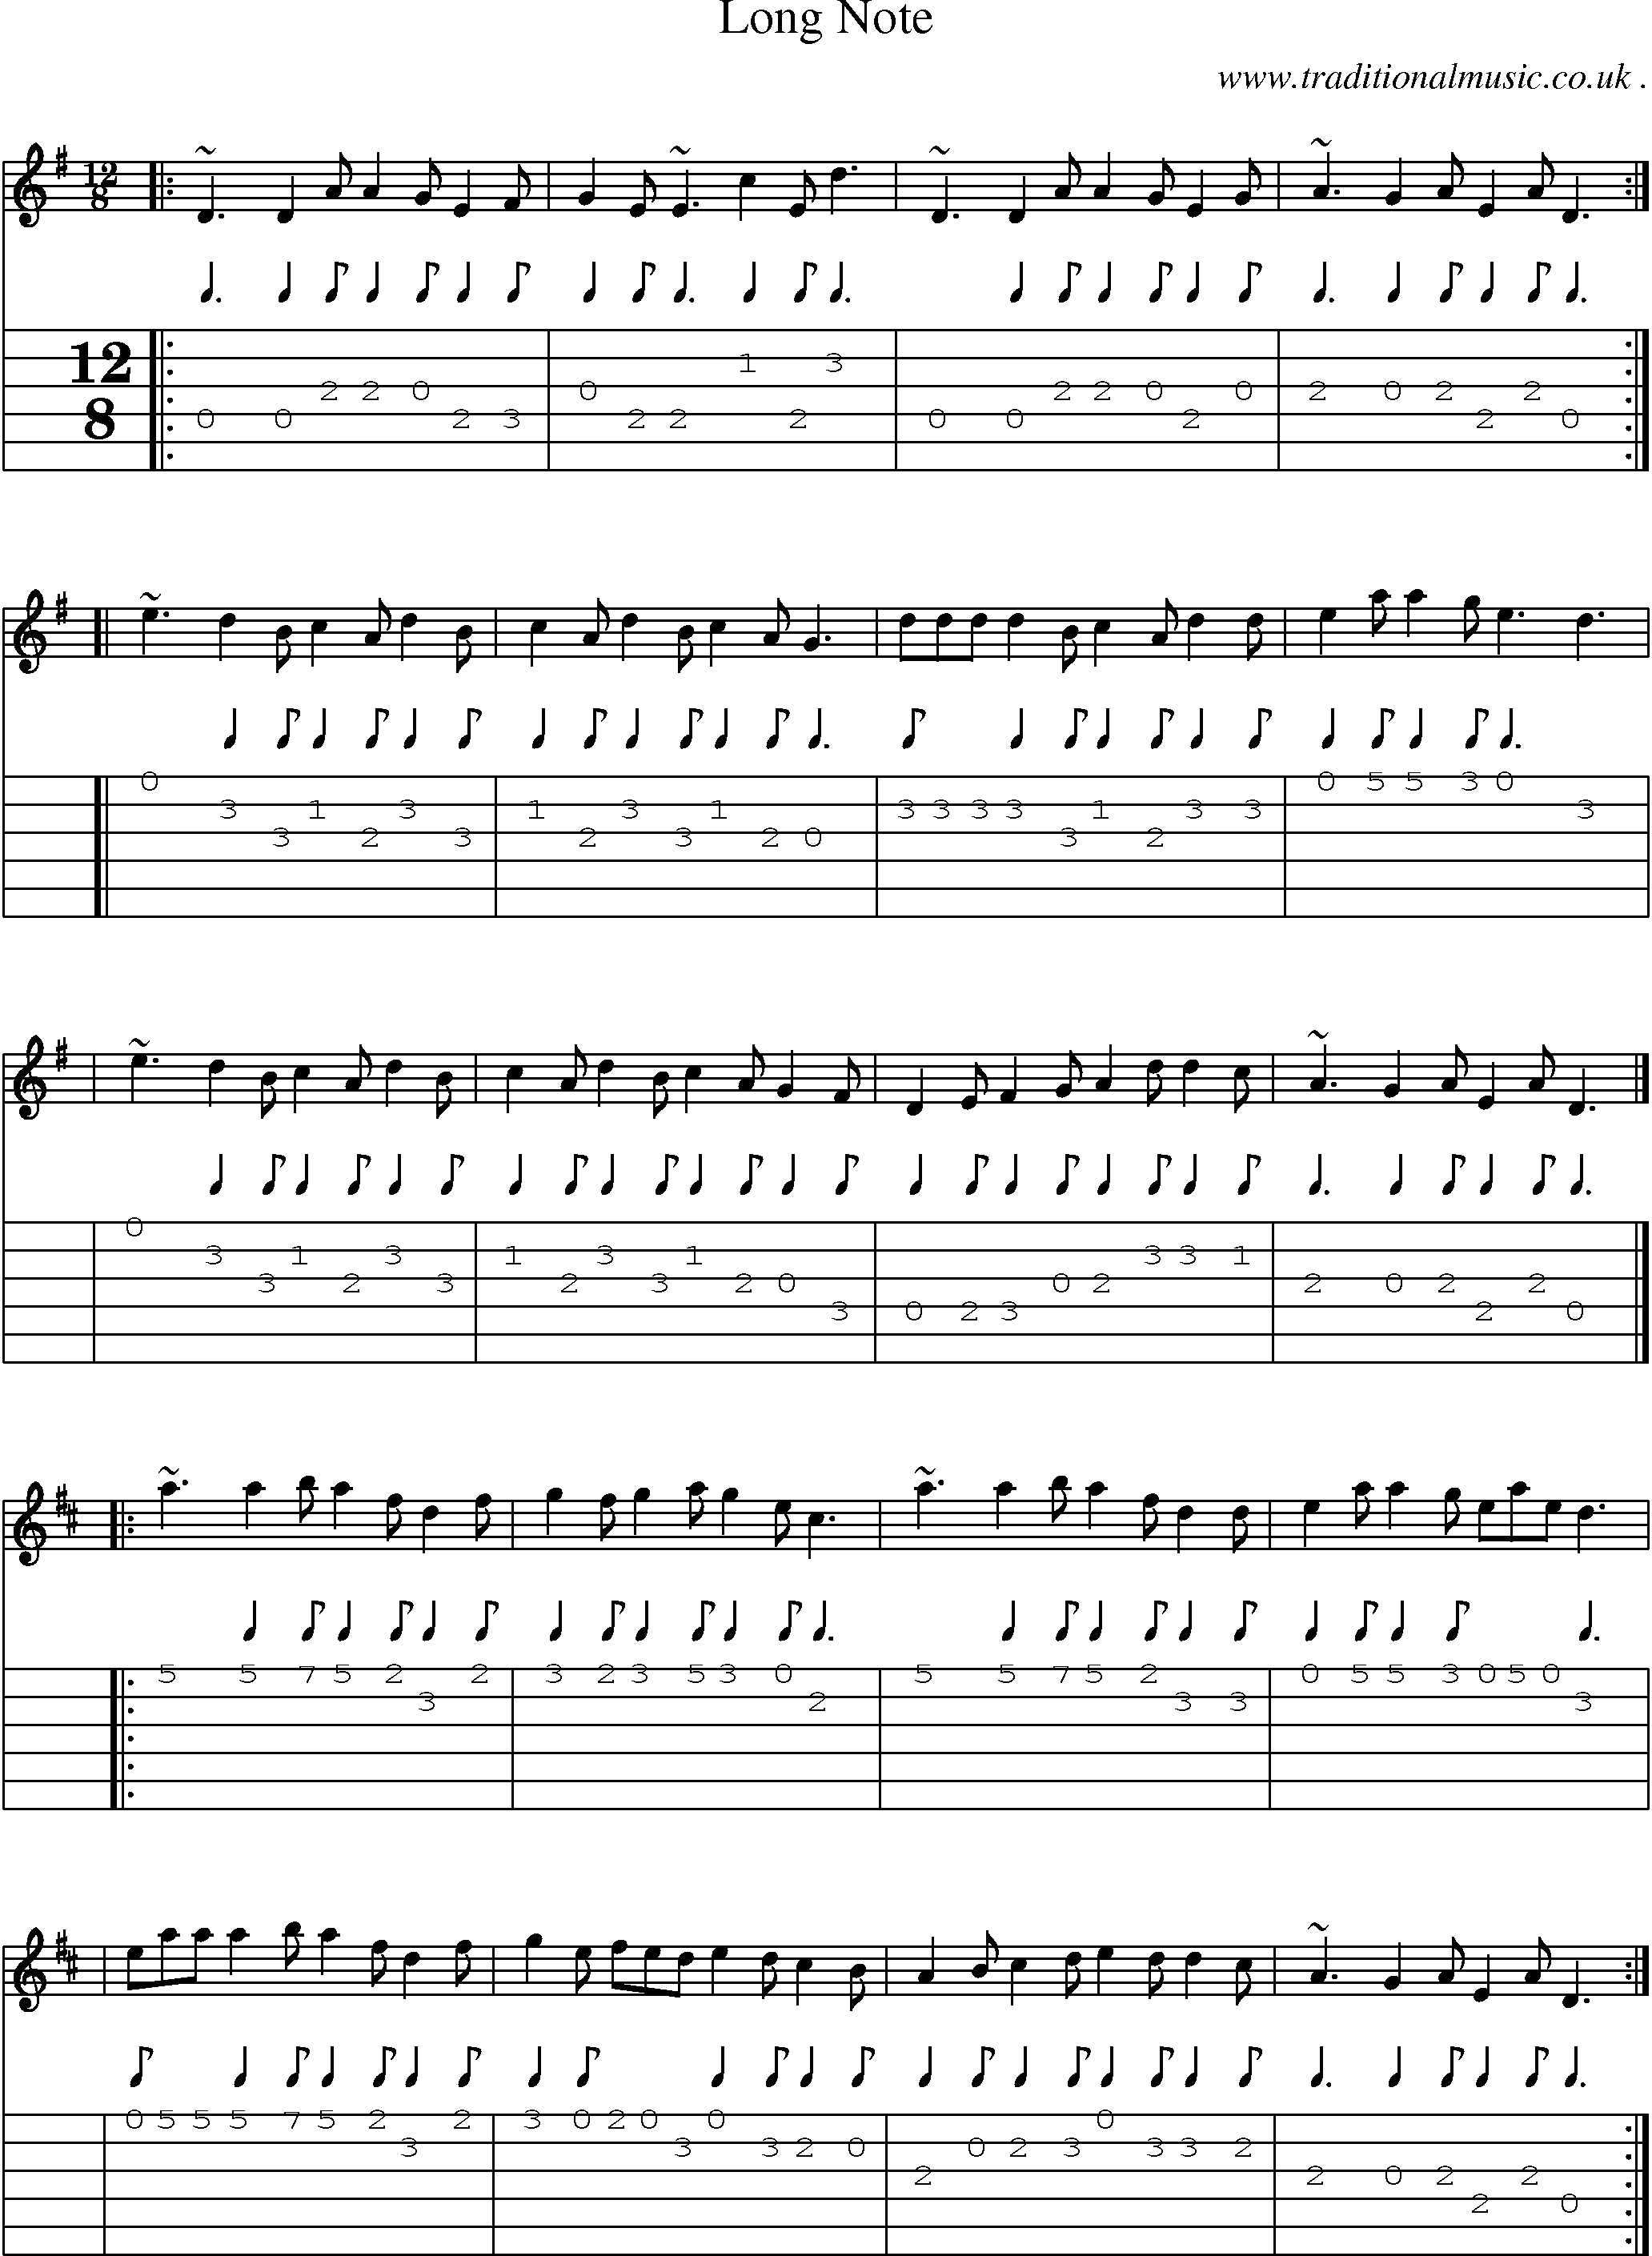 Sheet-music  score, Chords and Guitar Tabs for Long Note